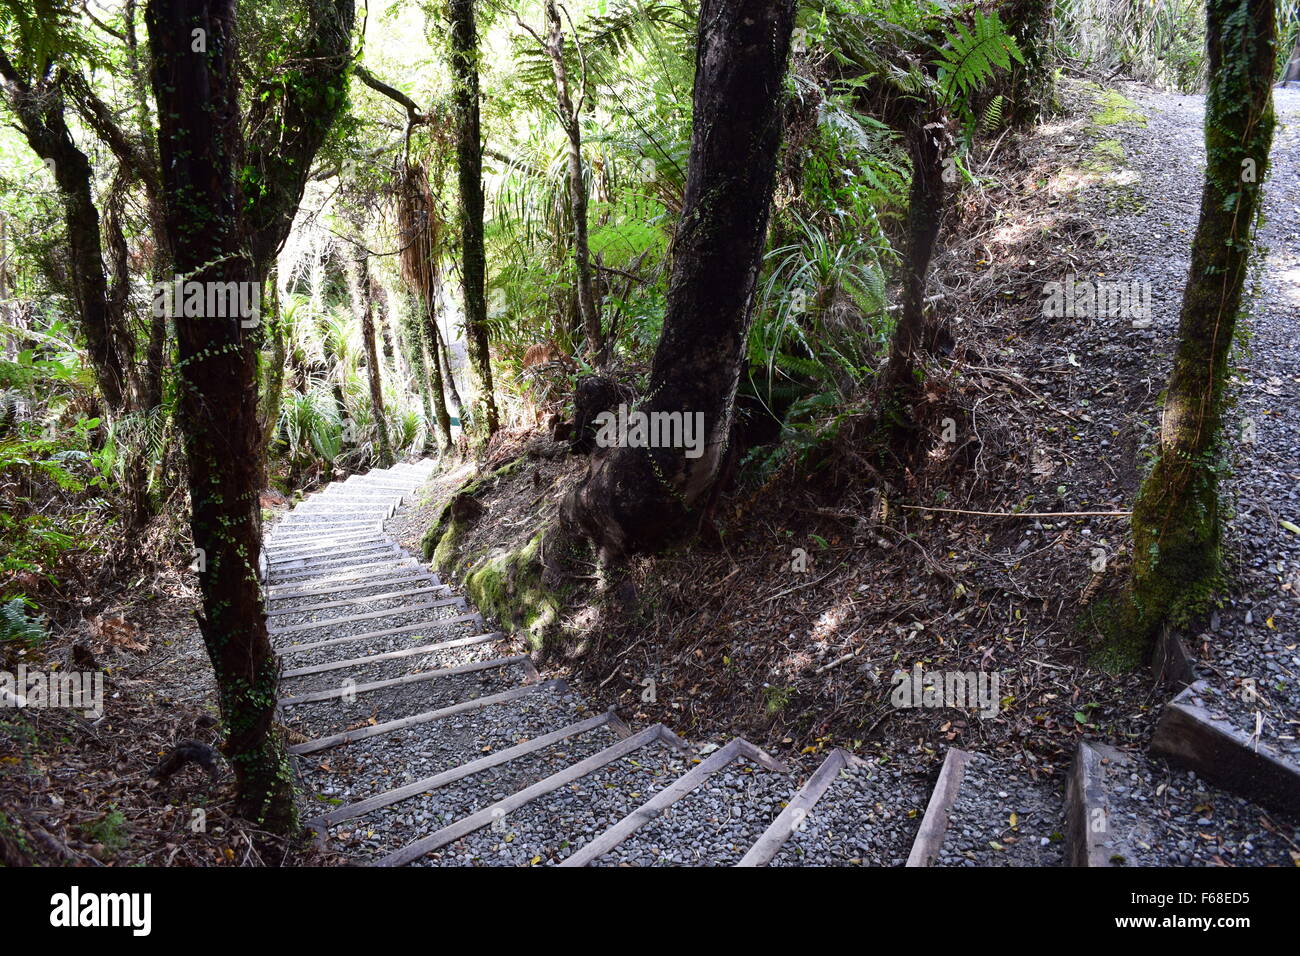 Winding stairs leading through the forest walk at Ship Creek, New Zealand, West Coast Stock Photo